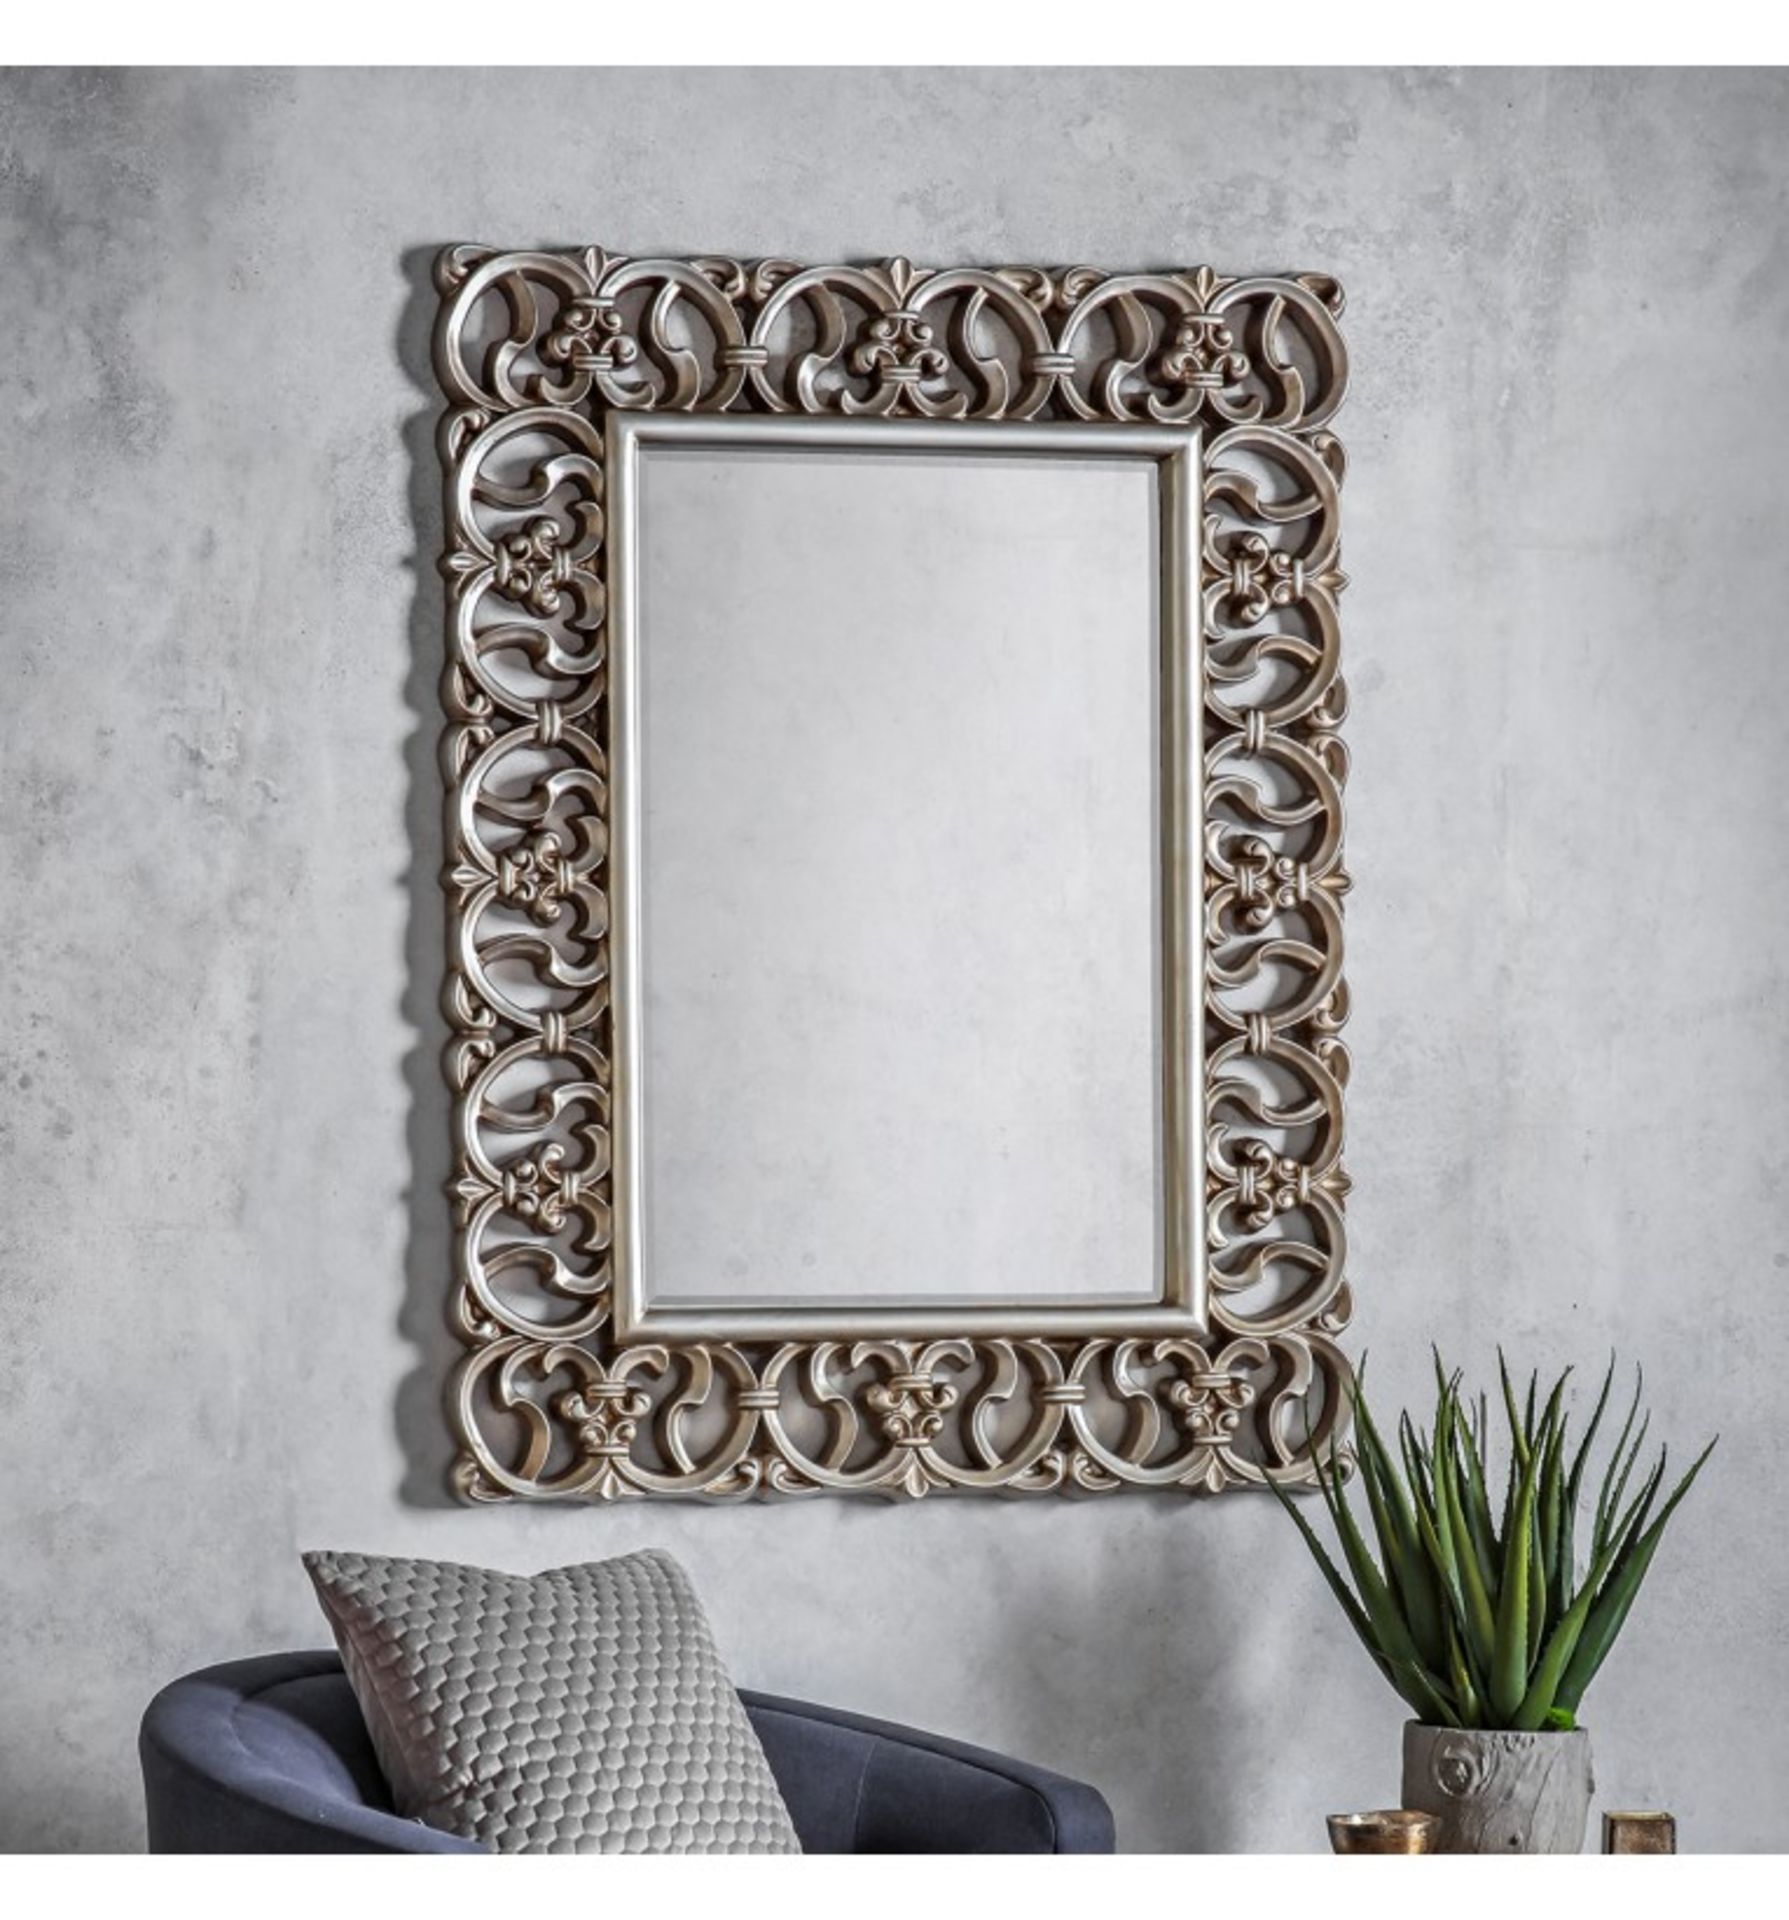 Sumner Mirror 1240x50x930mm Bold statement piece with a deep decorative frame in an antique silver